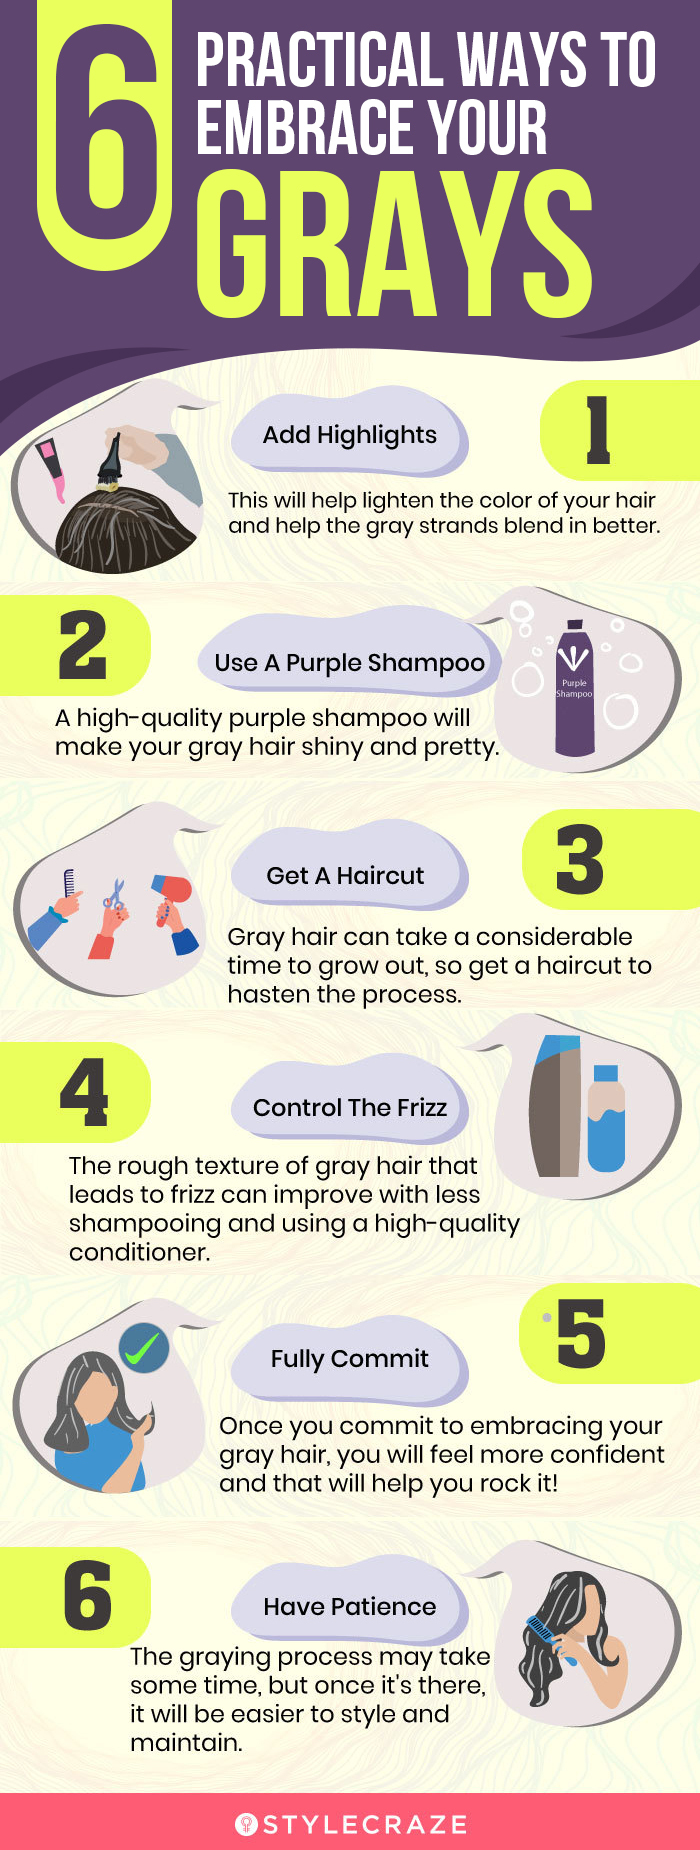 6 practical ways to embrace your grays [infographic]